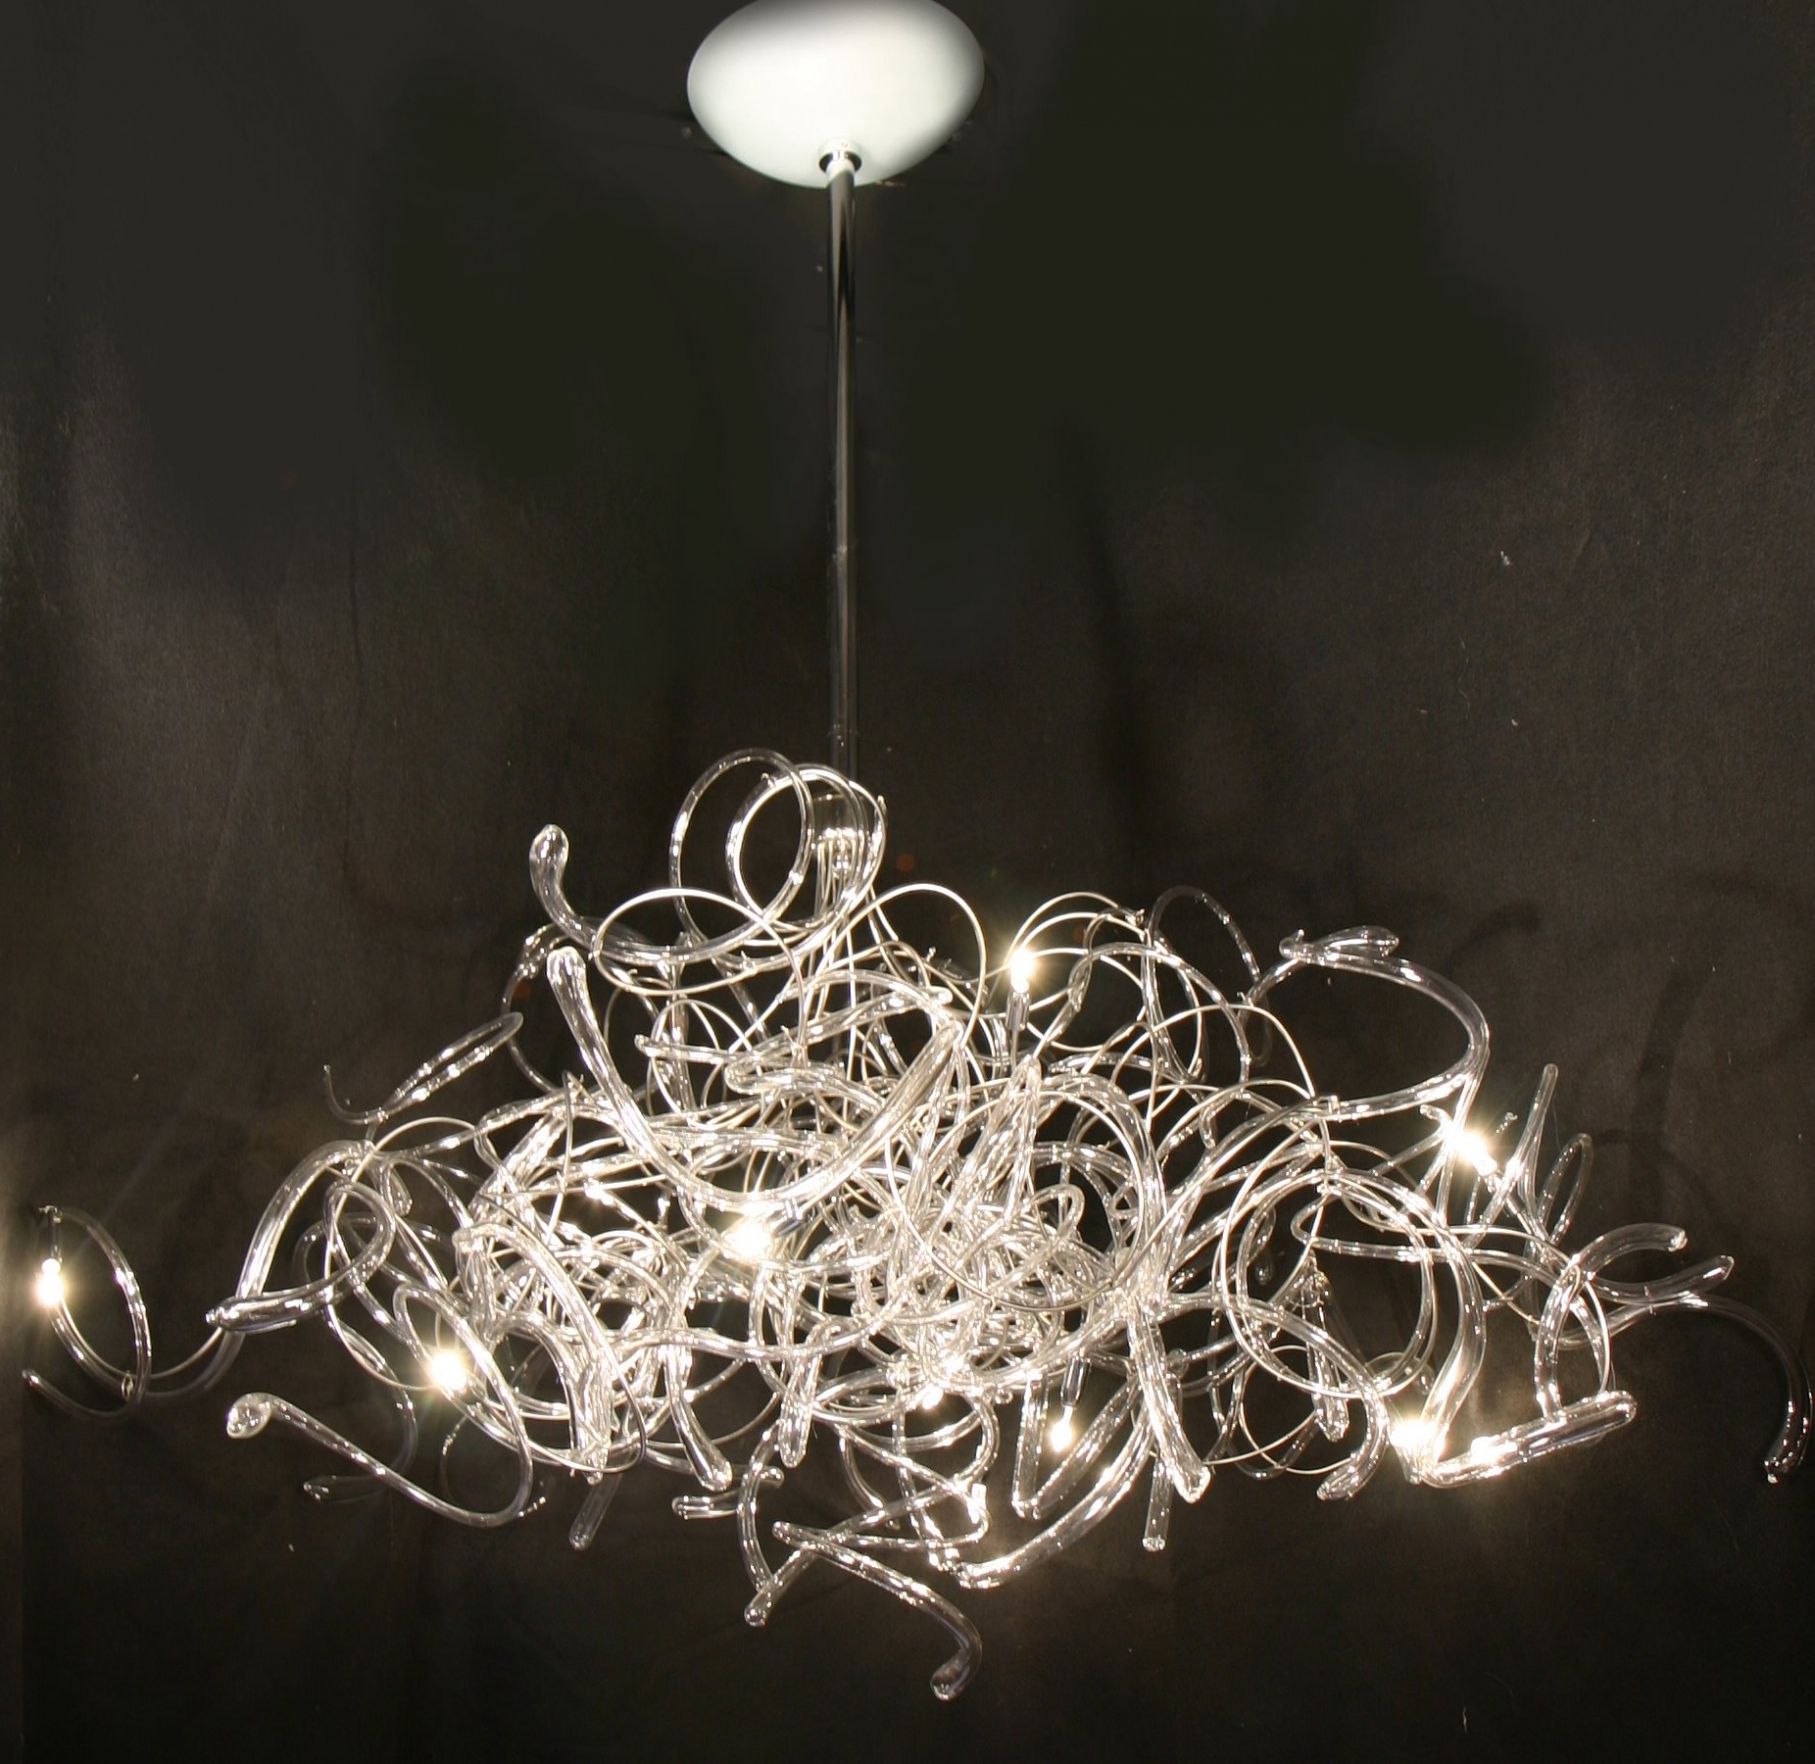 Italian Chandeliers Contemporary Pertaining To Recent Modern Italian Chandeliers – Chandelier Designs (View 1 of 20)